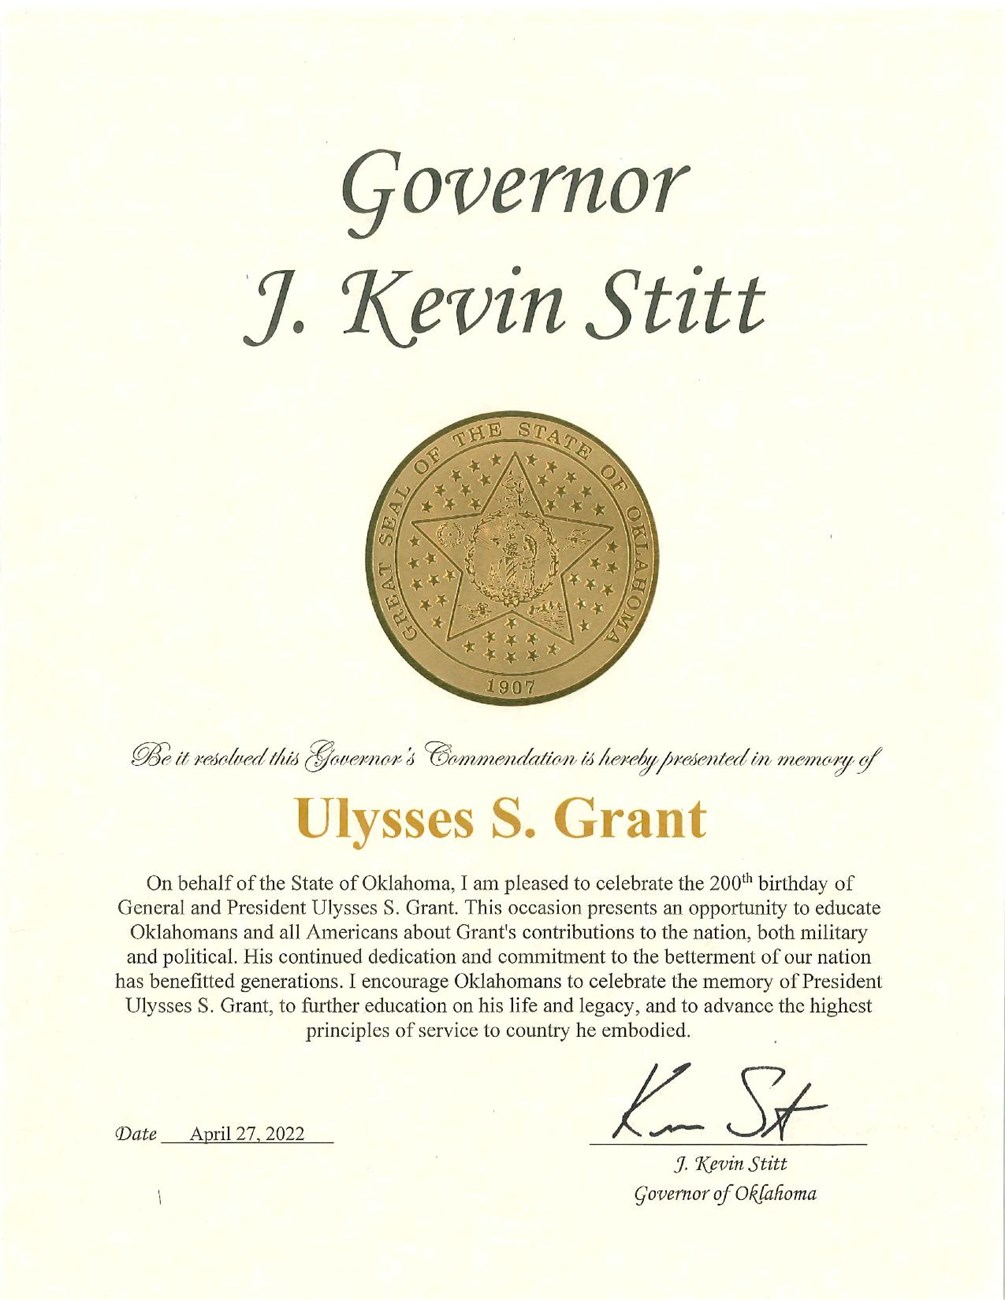 Message from Oklahoma honoring the 200th anniversary of Ulysses S Grant's birthday. Golden seal of the state attached in center of page